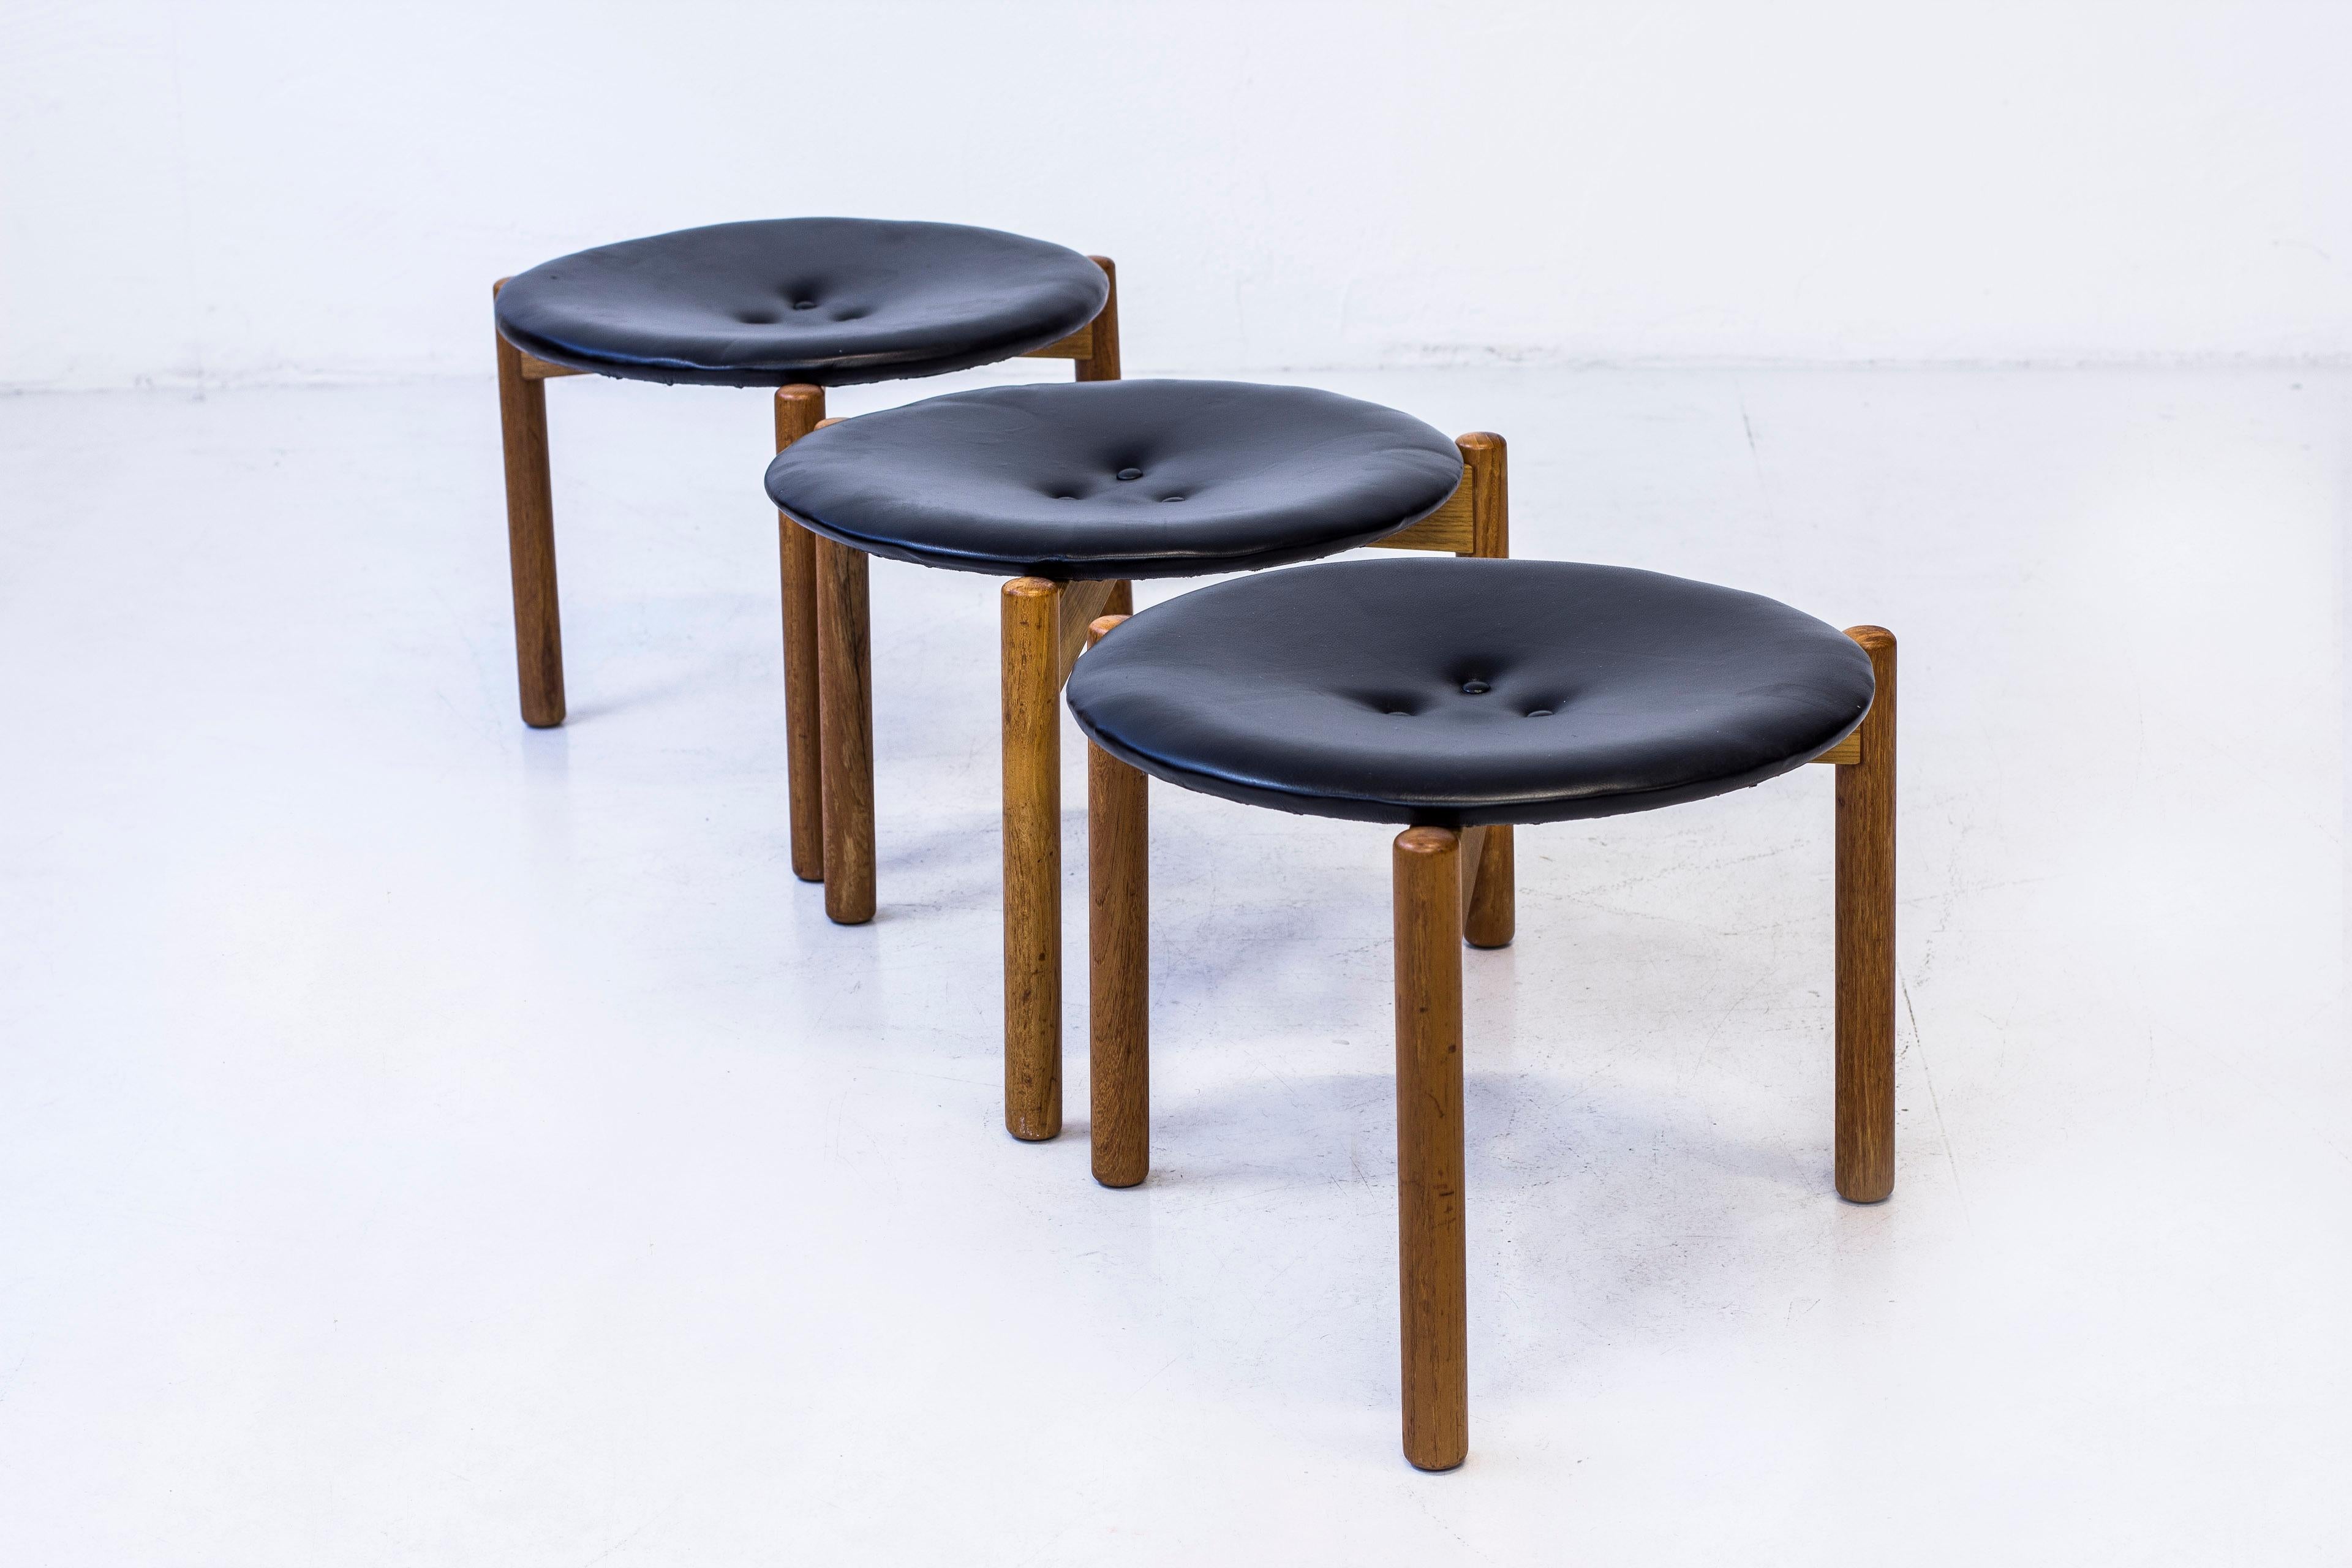 Very rare stools deigned by Uno & Östen Kristiansson. Produced by Luxus in Vittsjö, Sweden during the 1960s. Made from solid oak and teak wood in the base with black leather seats. Very good condition with very few signs of age and wear. Three